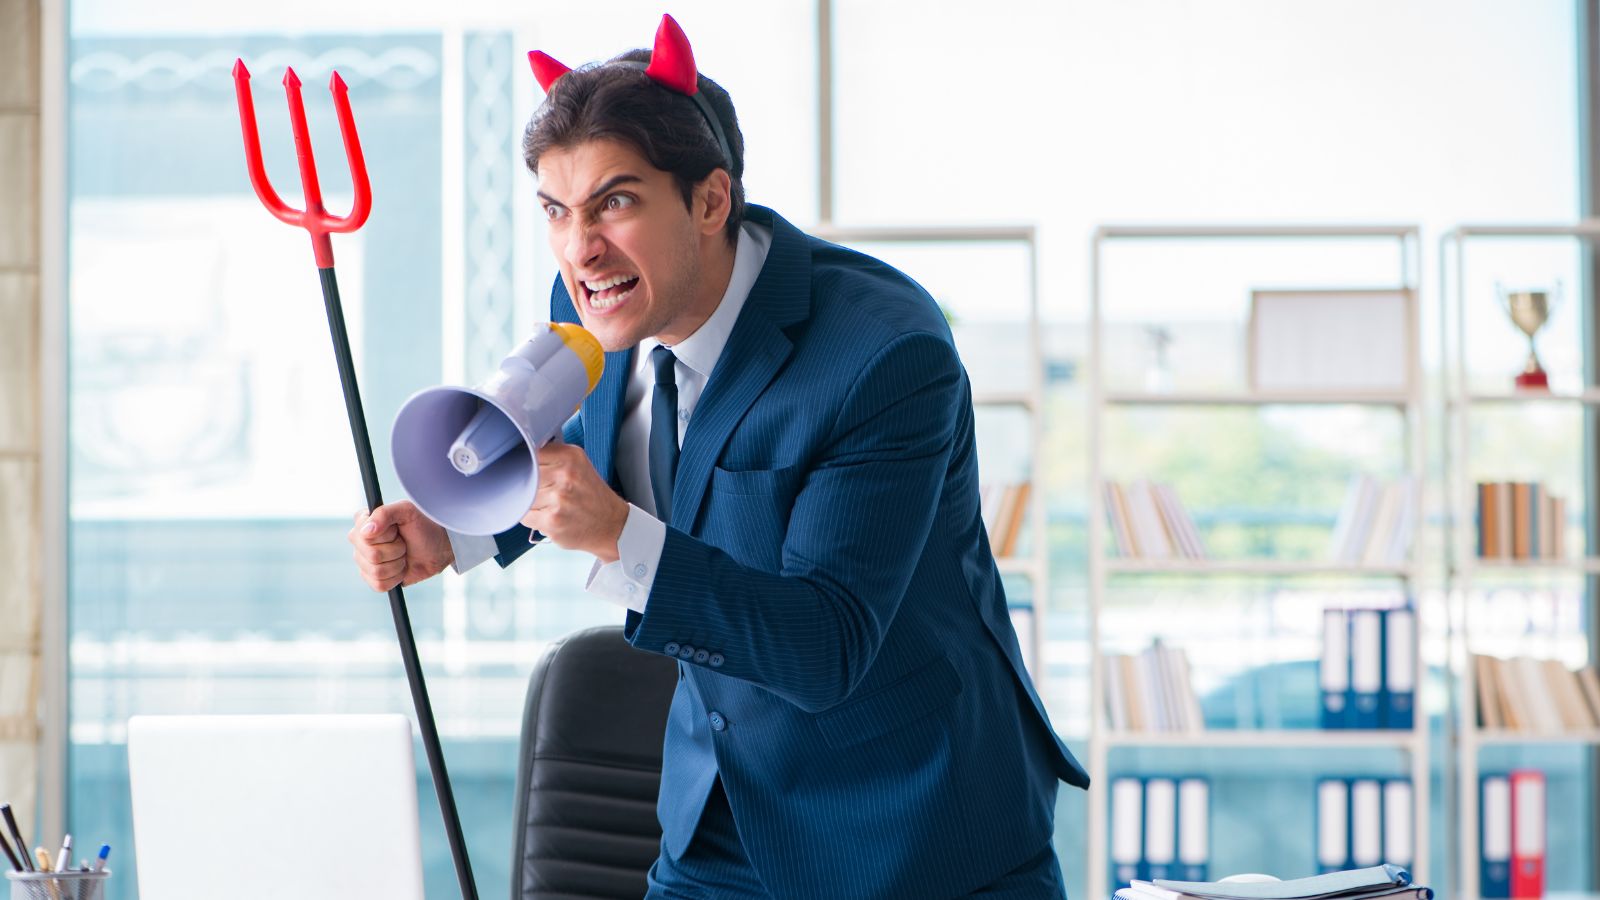 a man in a suit with horns and a megaphone